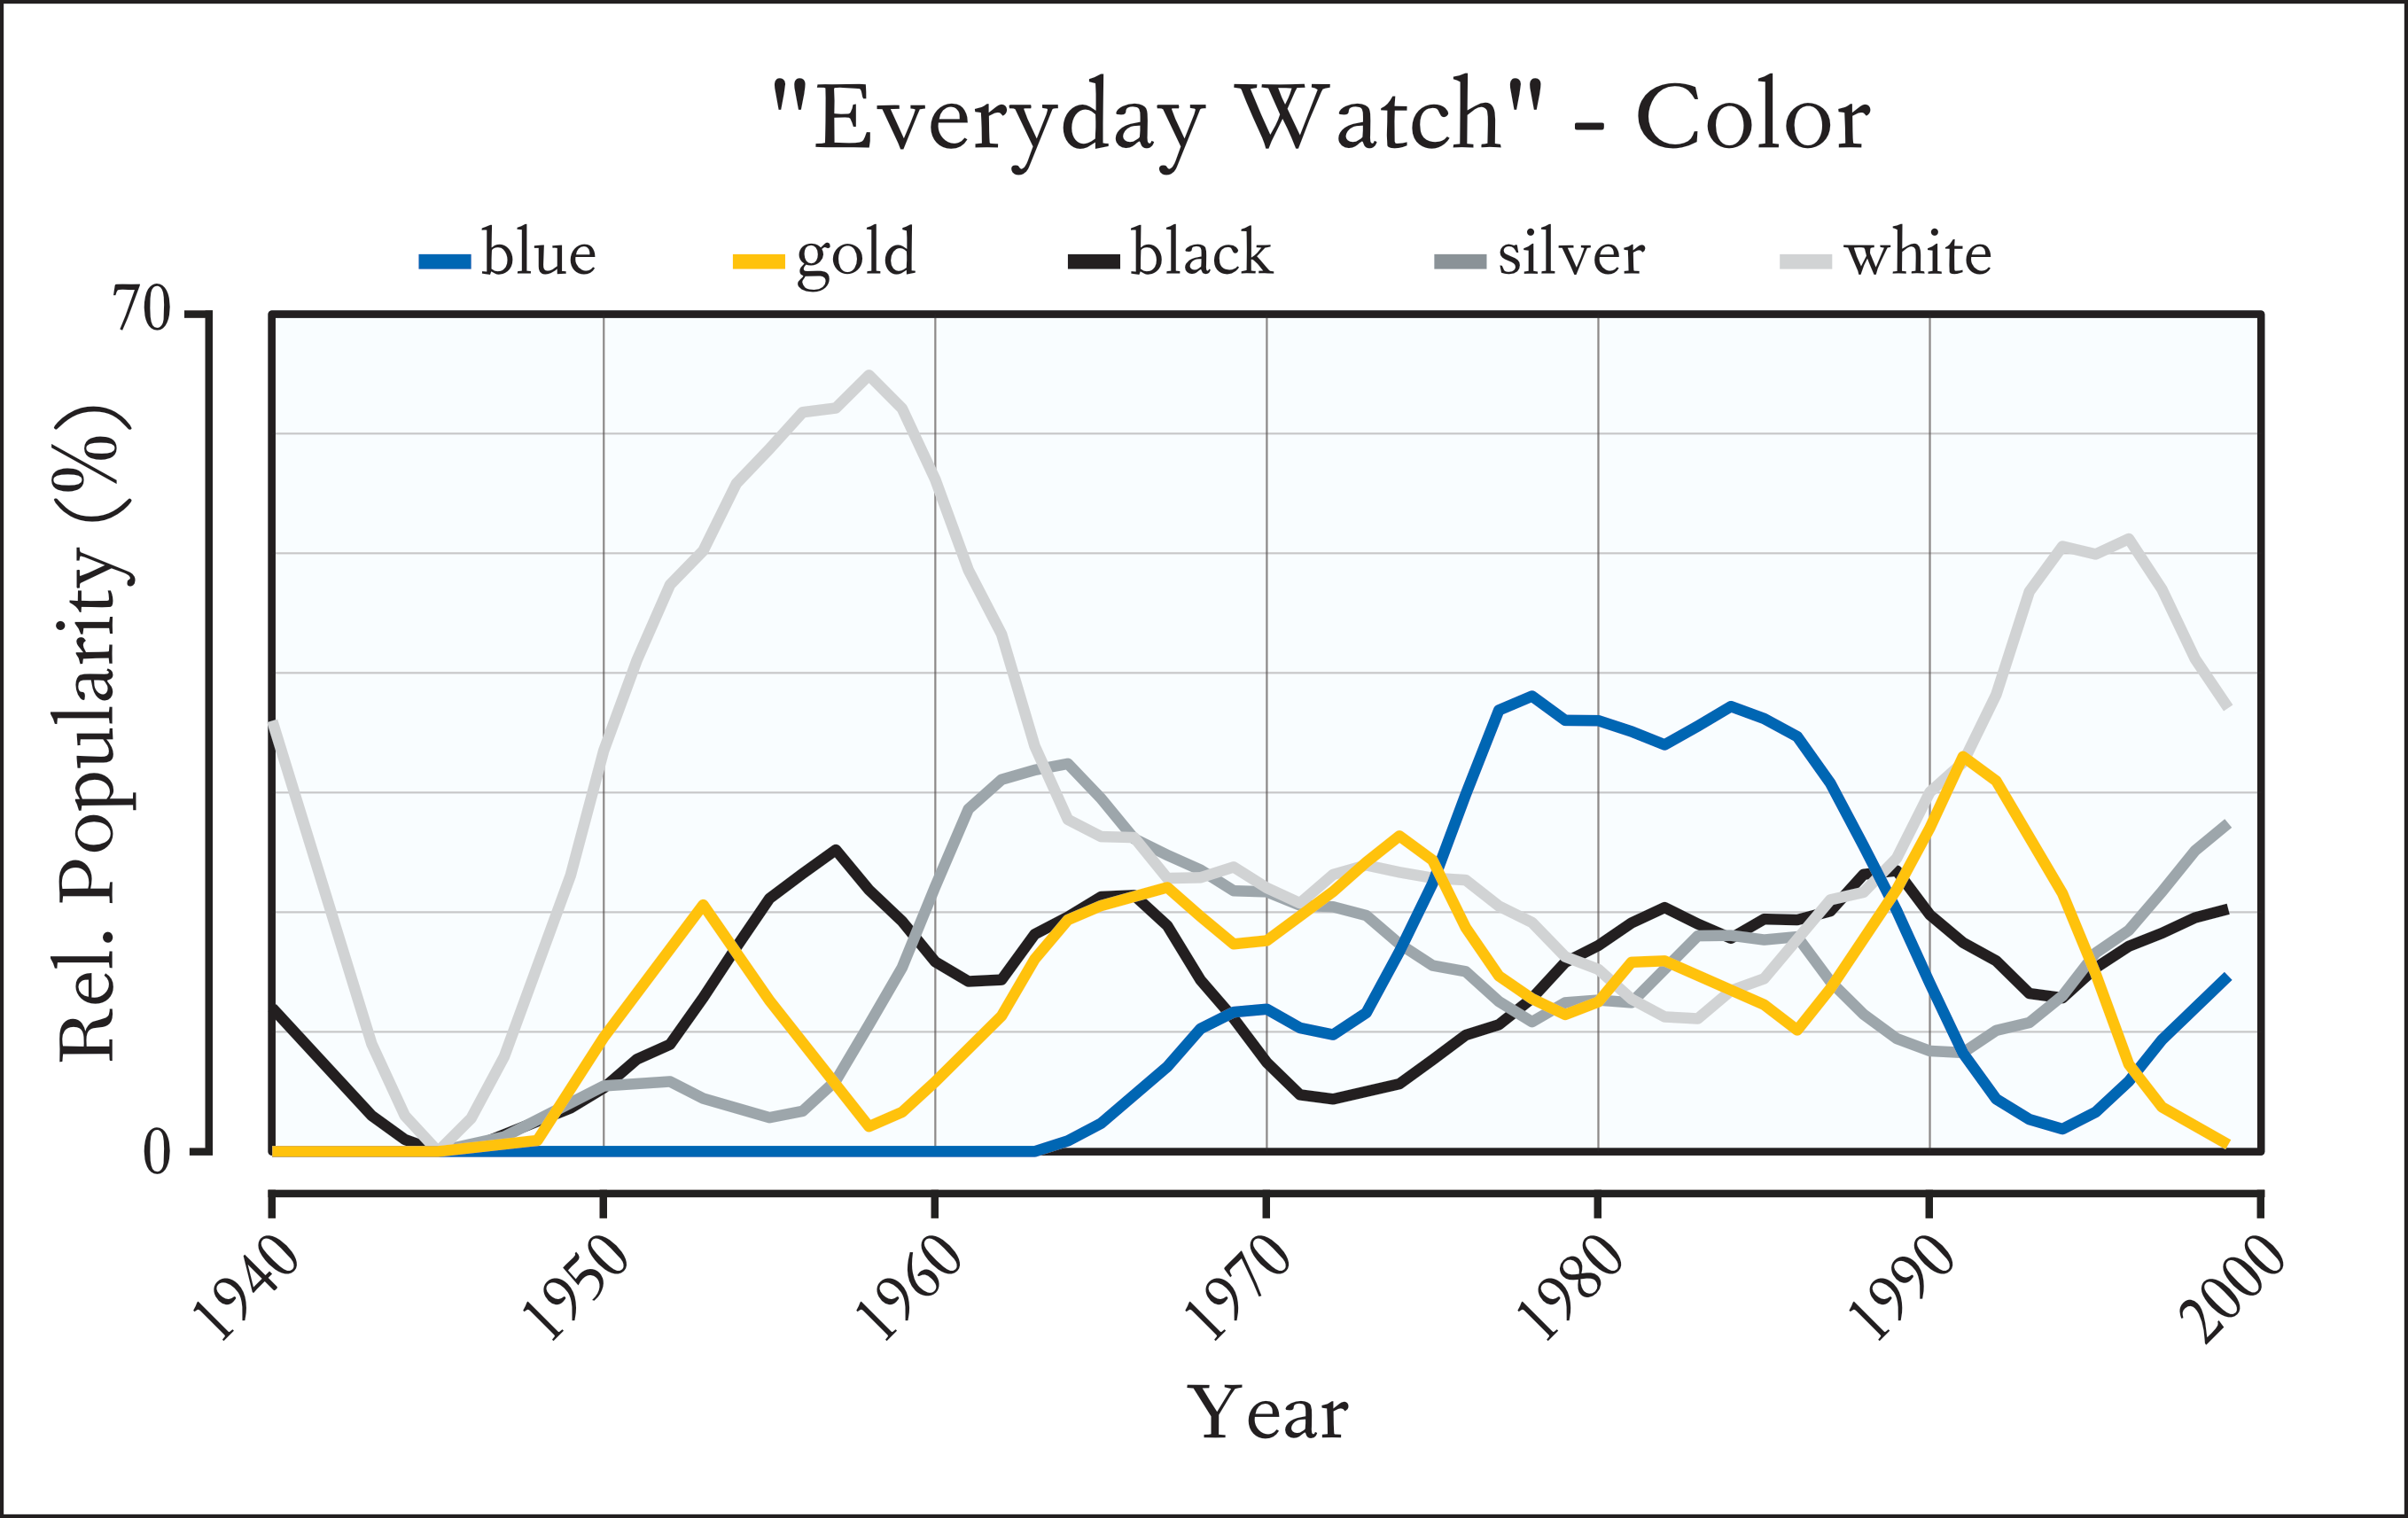 Historical Distribution of Dial Color for Dress Casual Watches between 1940 - 2000